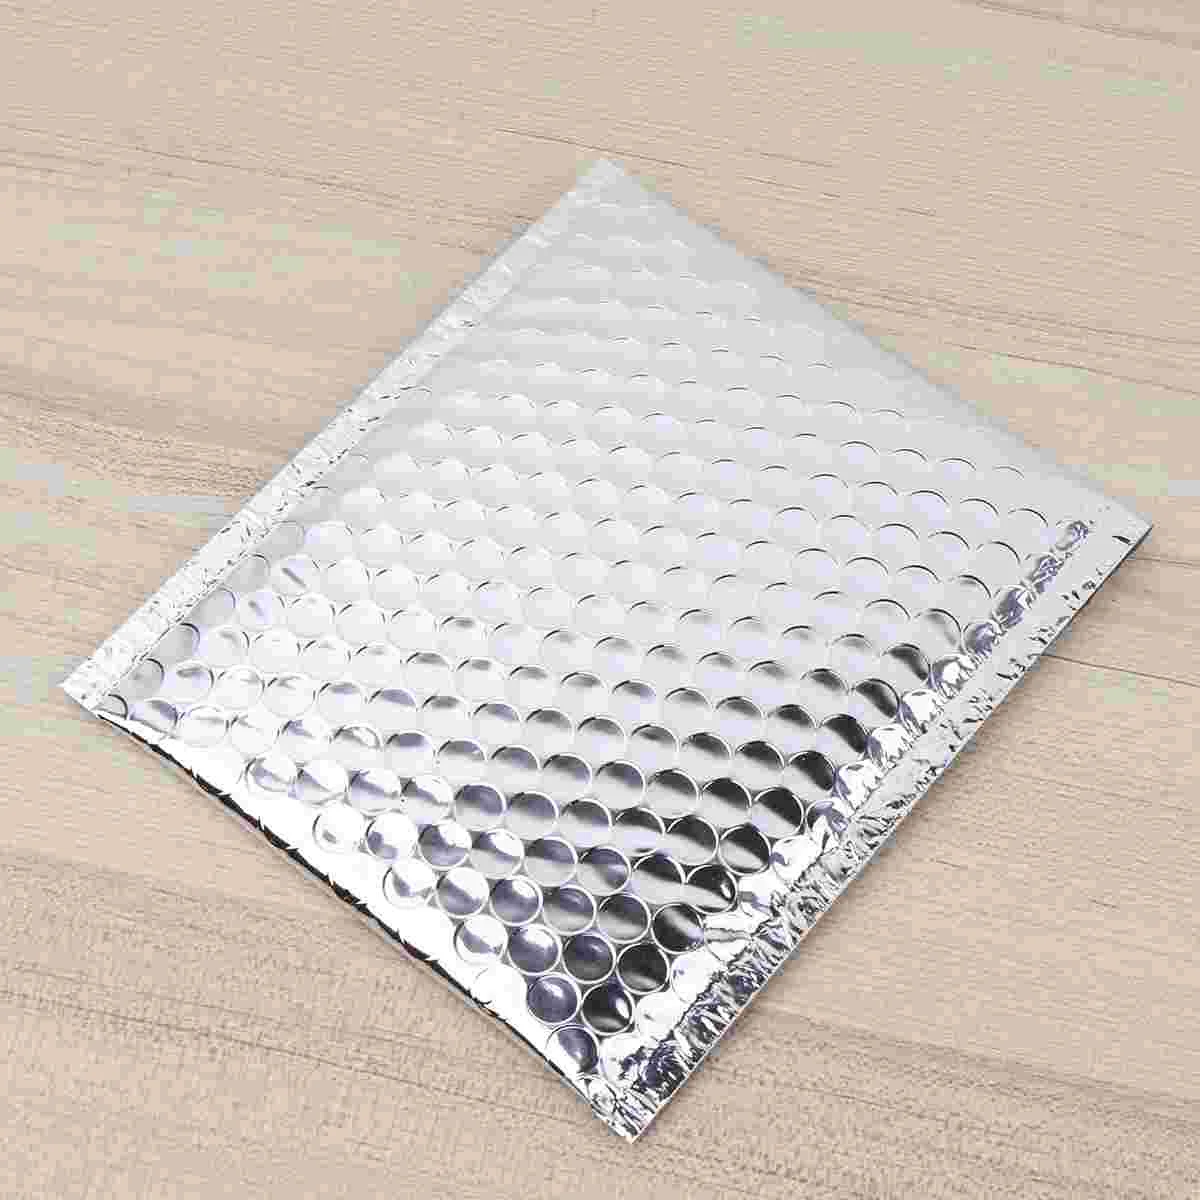 28 Pcs Bubble Bag Shockproof Packaging Metal Small Envelope Waterproof Logistic Express cushioning for pearl cotton bag packaging soft foam board film bubble filled shockproof 100pcs 15 25cm specifications